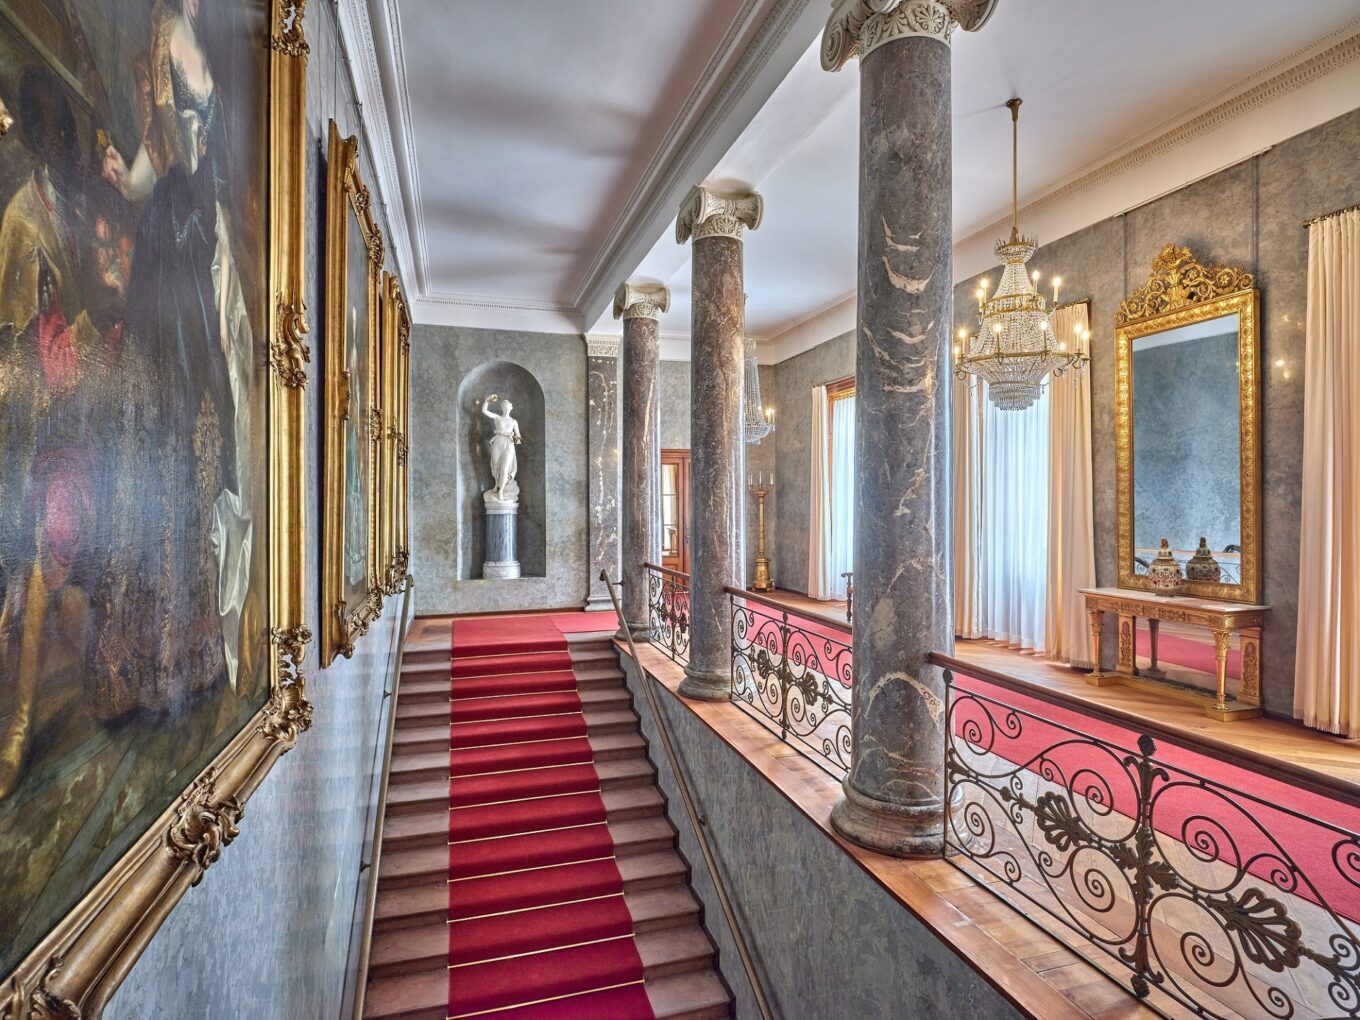 Bad Homburg Palace, Imperial Rooms